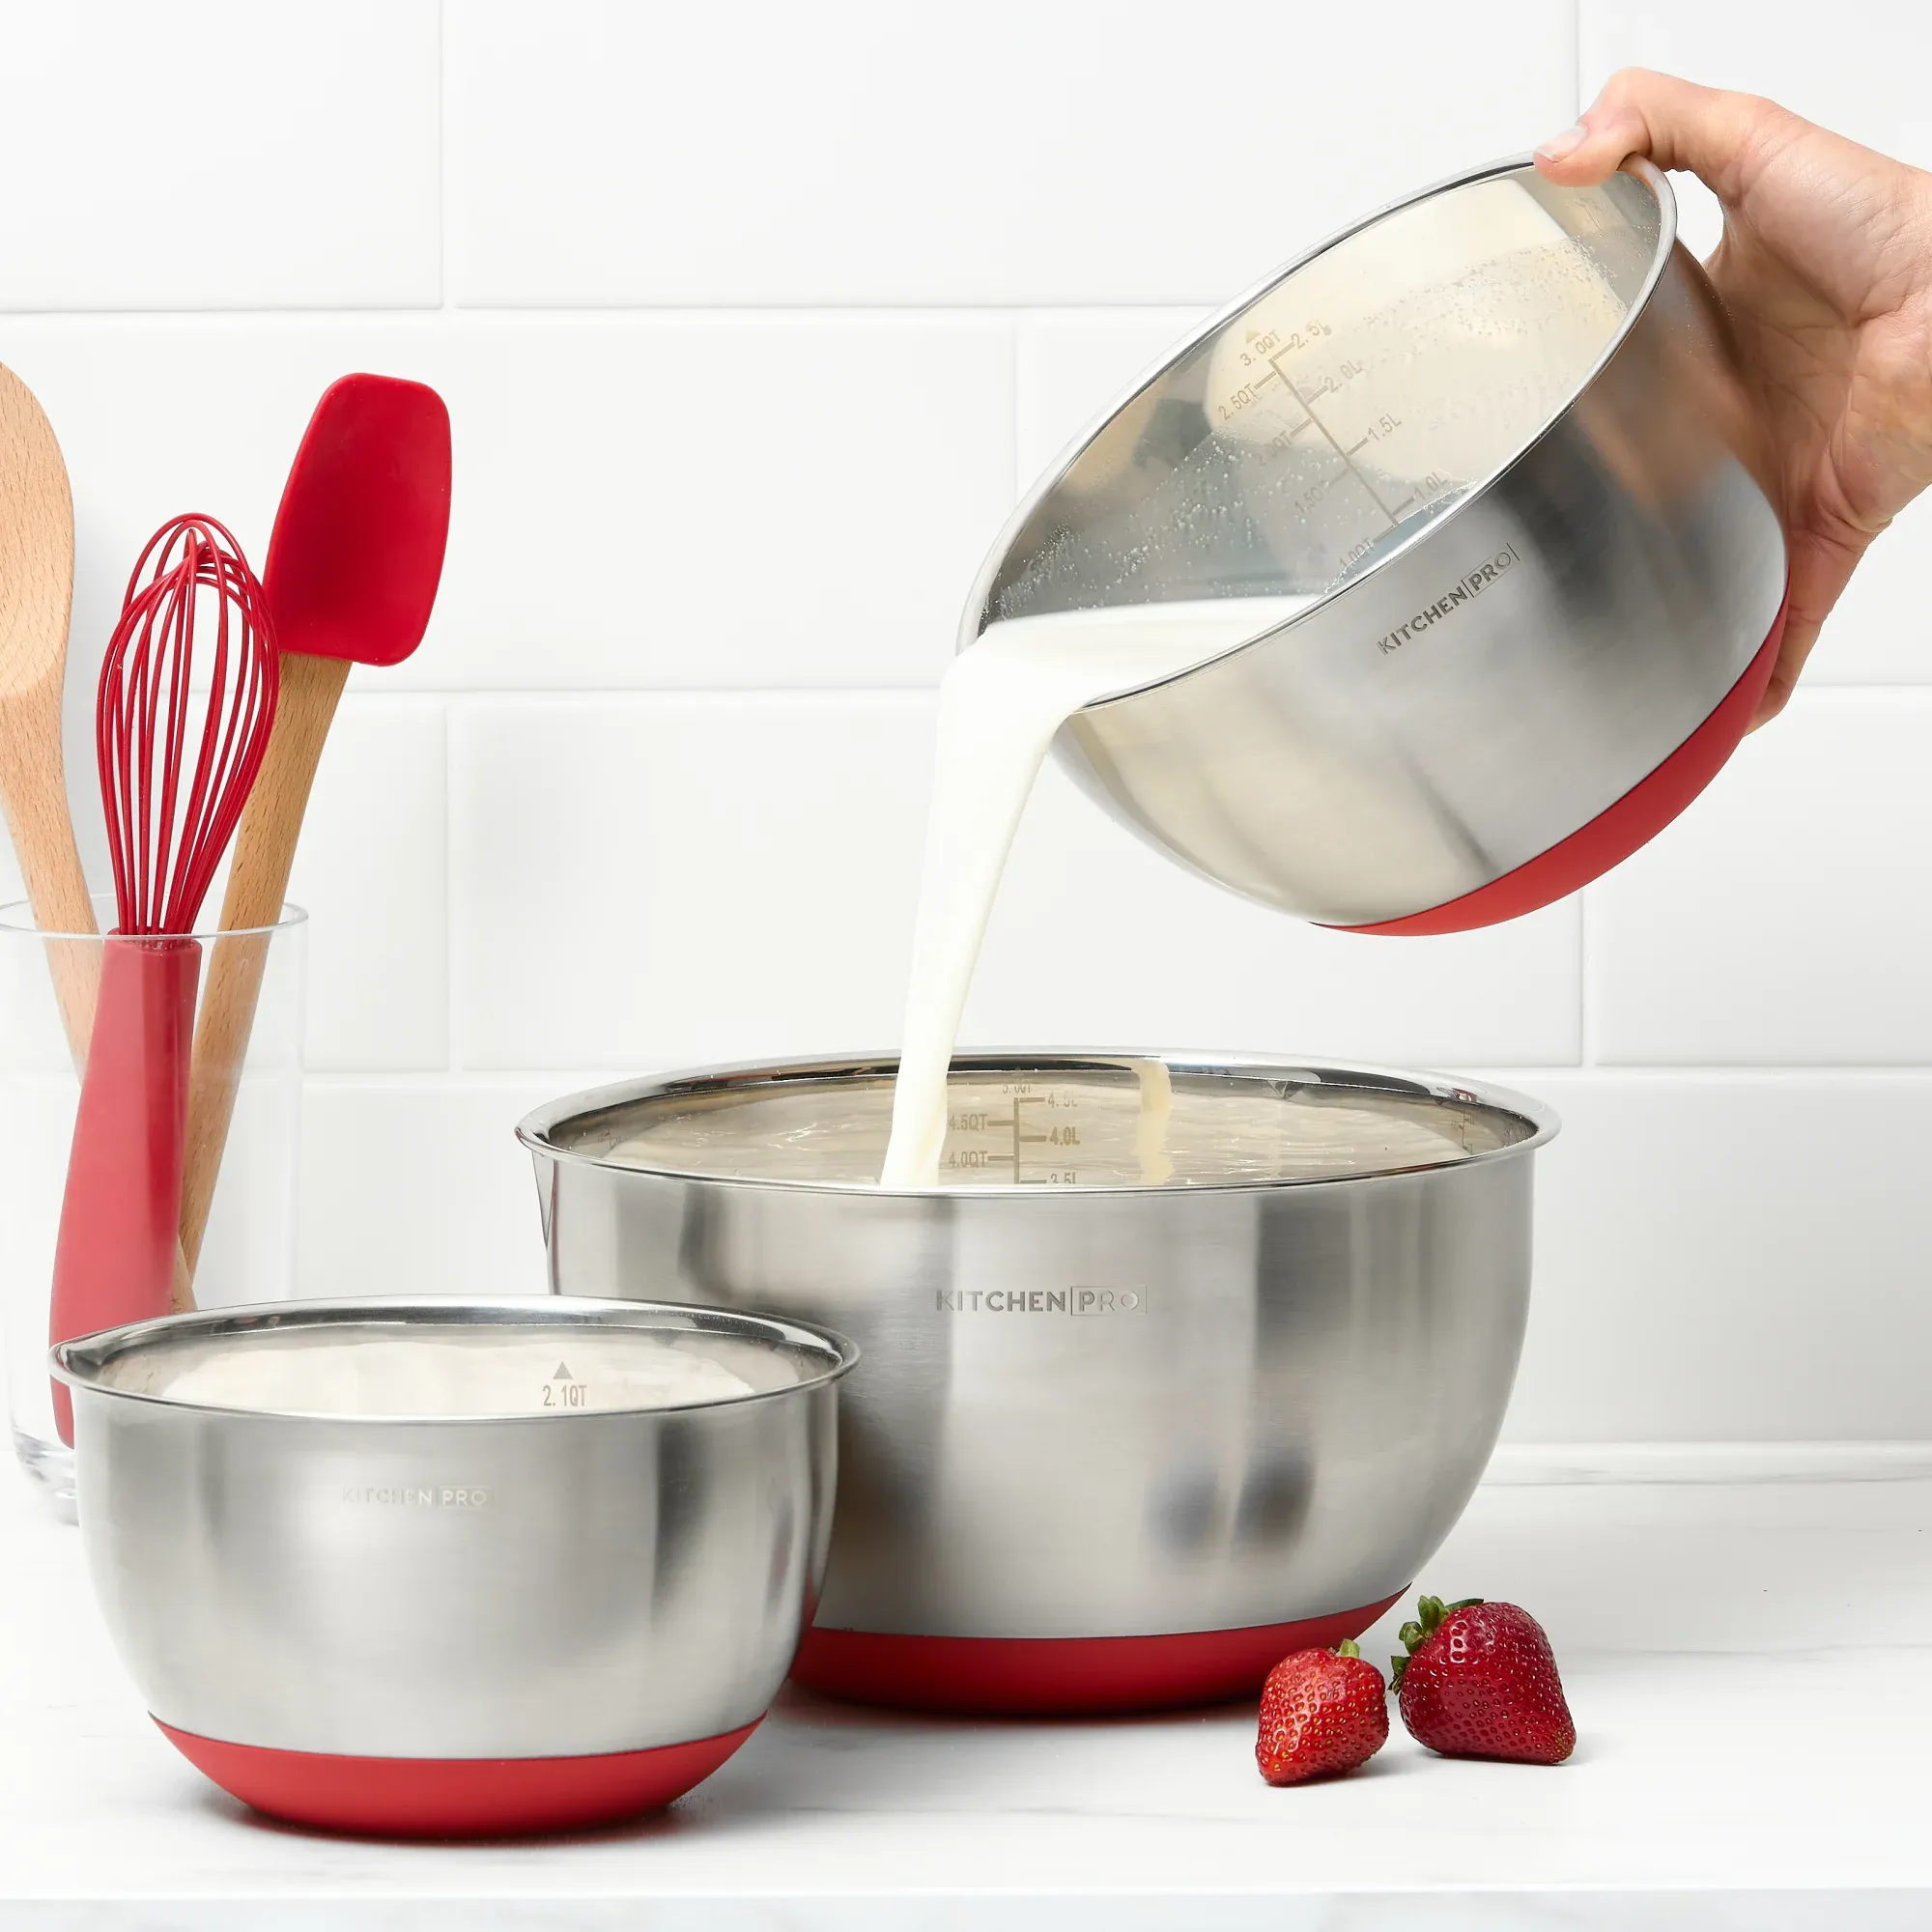 2023-02-09-Kitchen-Pro-Stainless-Steel-Mixing-Bowl-with-Silicone-Bottom-Set-3pc-Red-LS1.webp